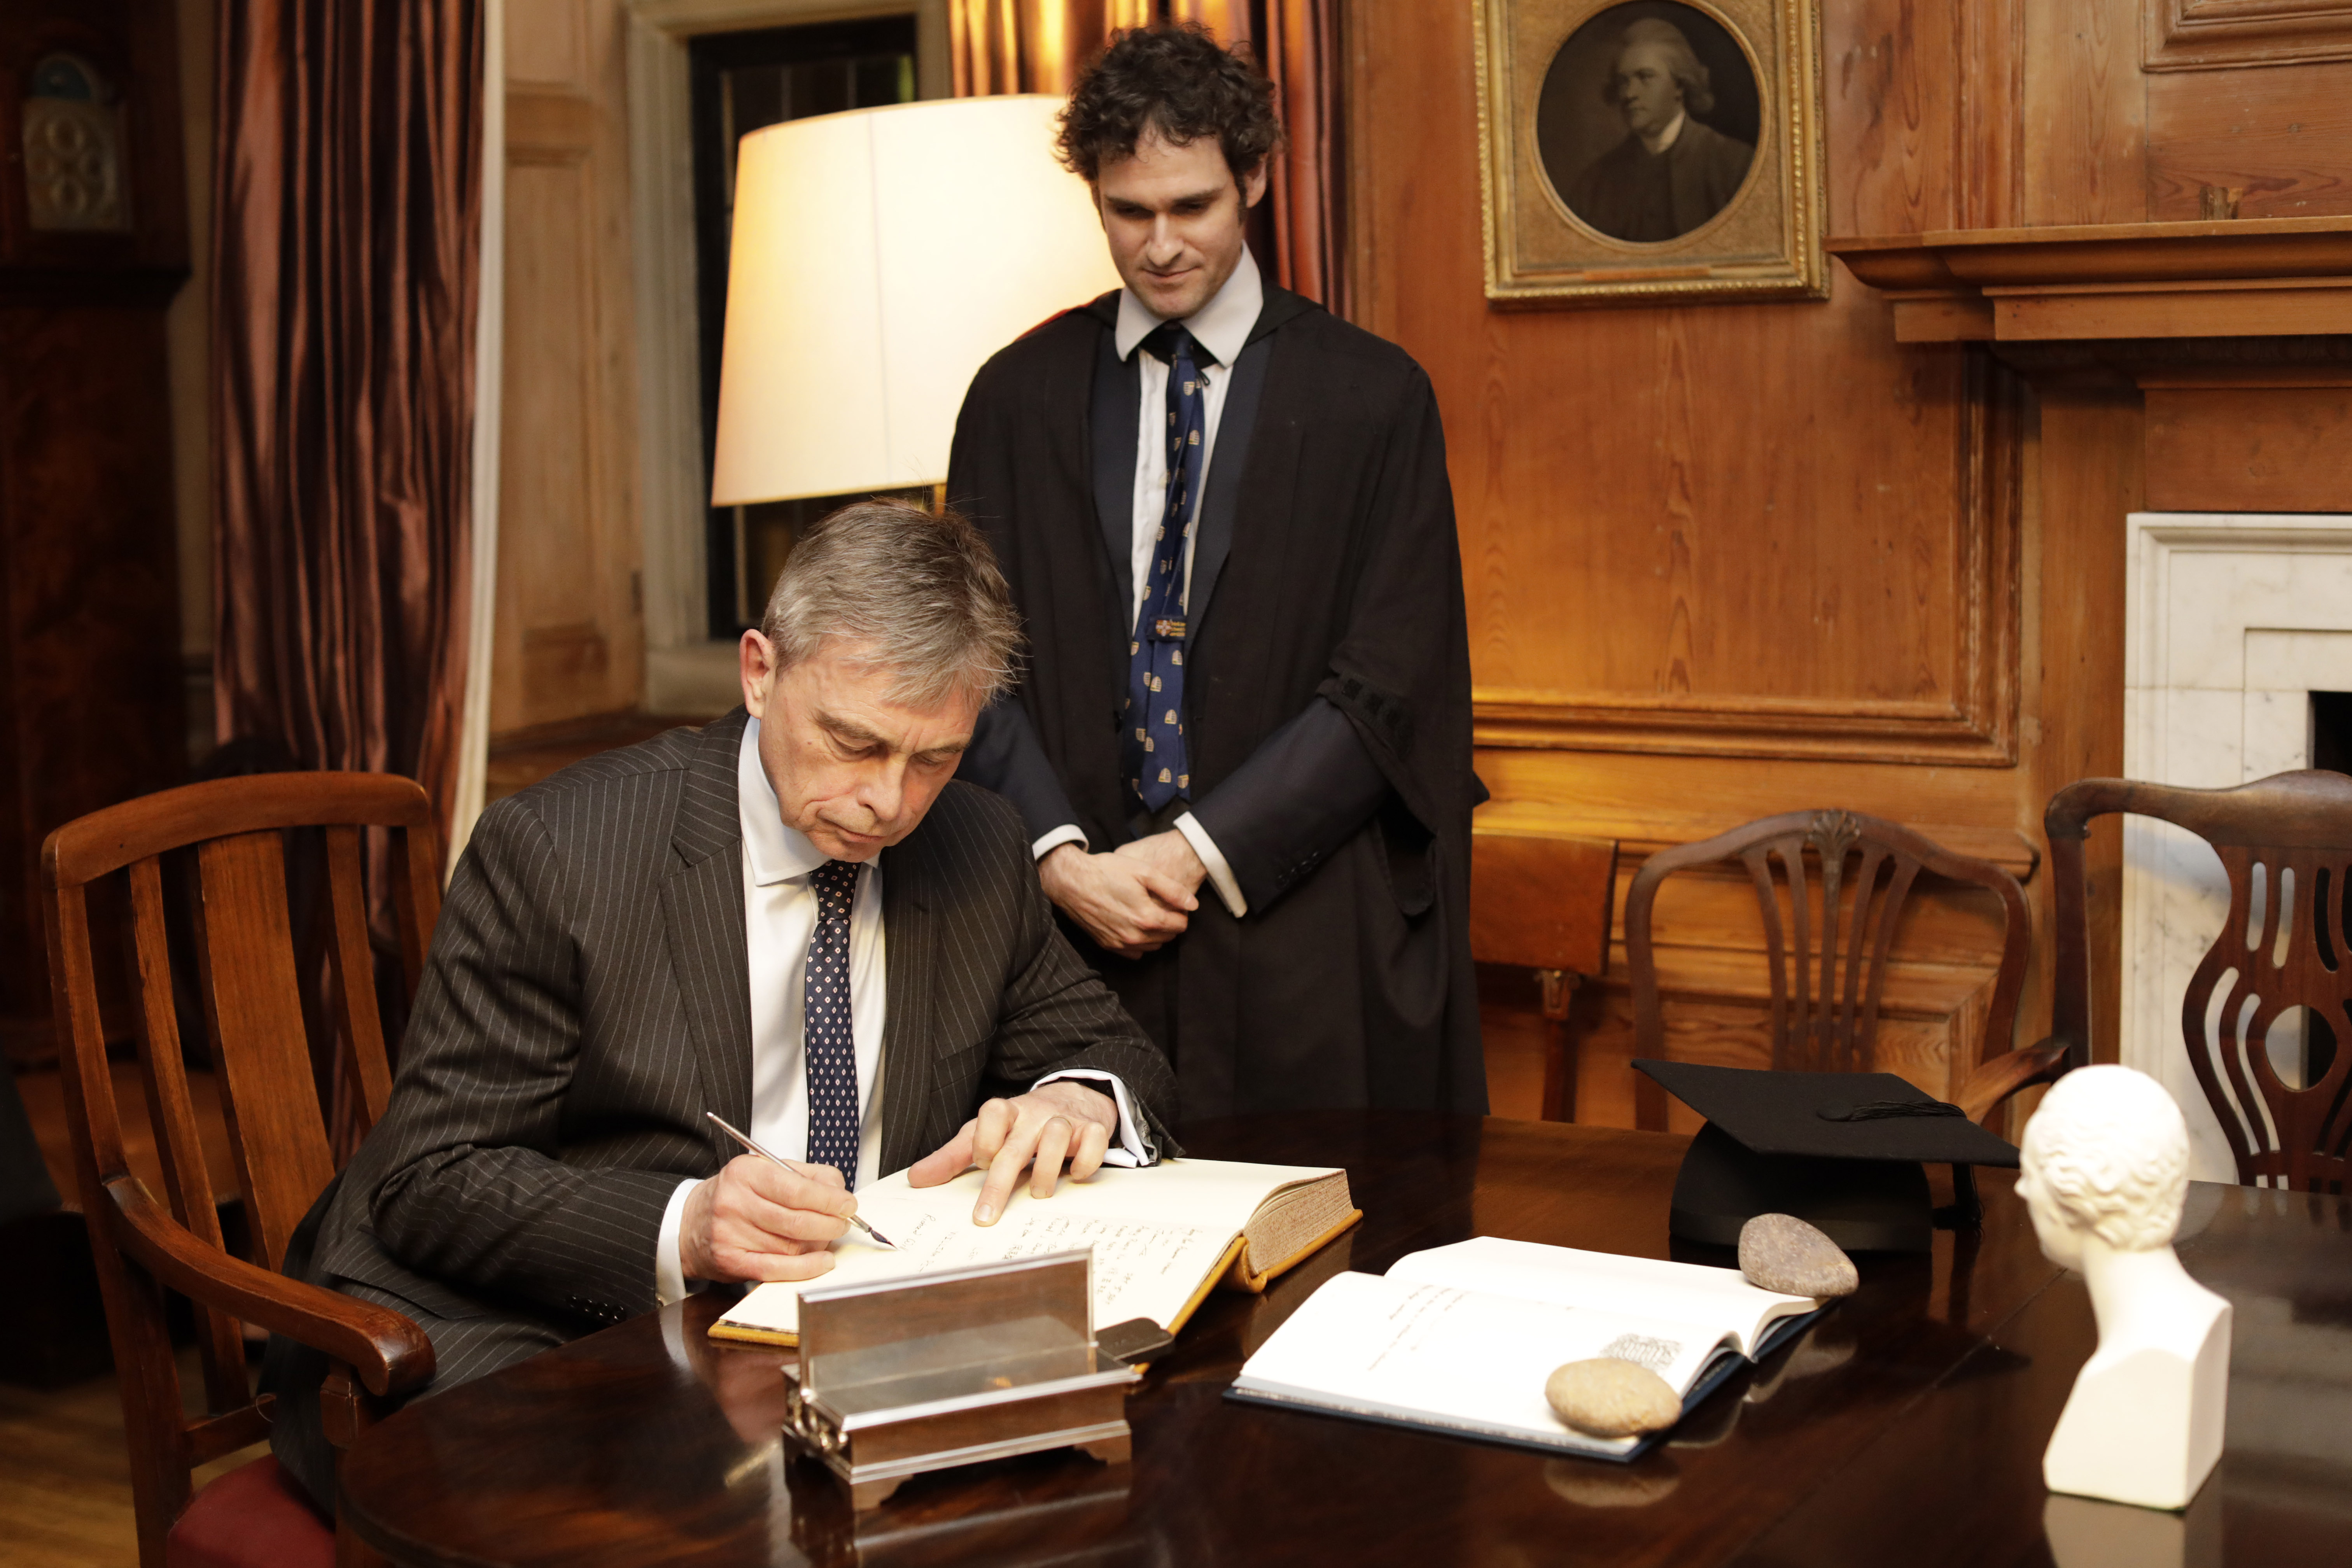 Richard Rawcliffe signs Matriculation Book while the Praelector watches